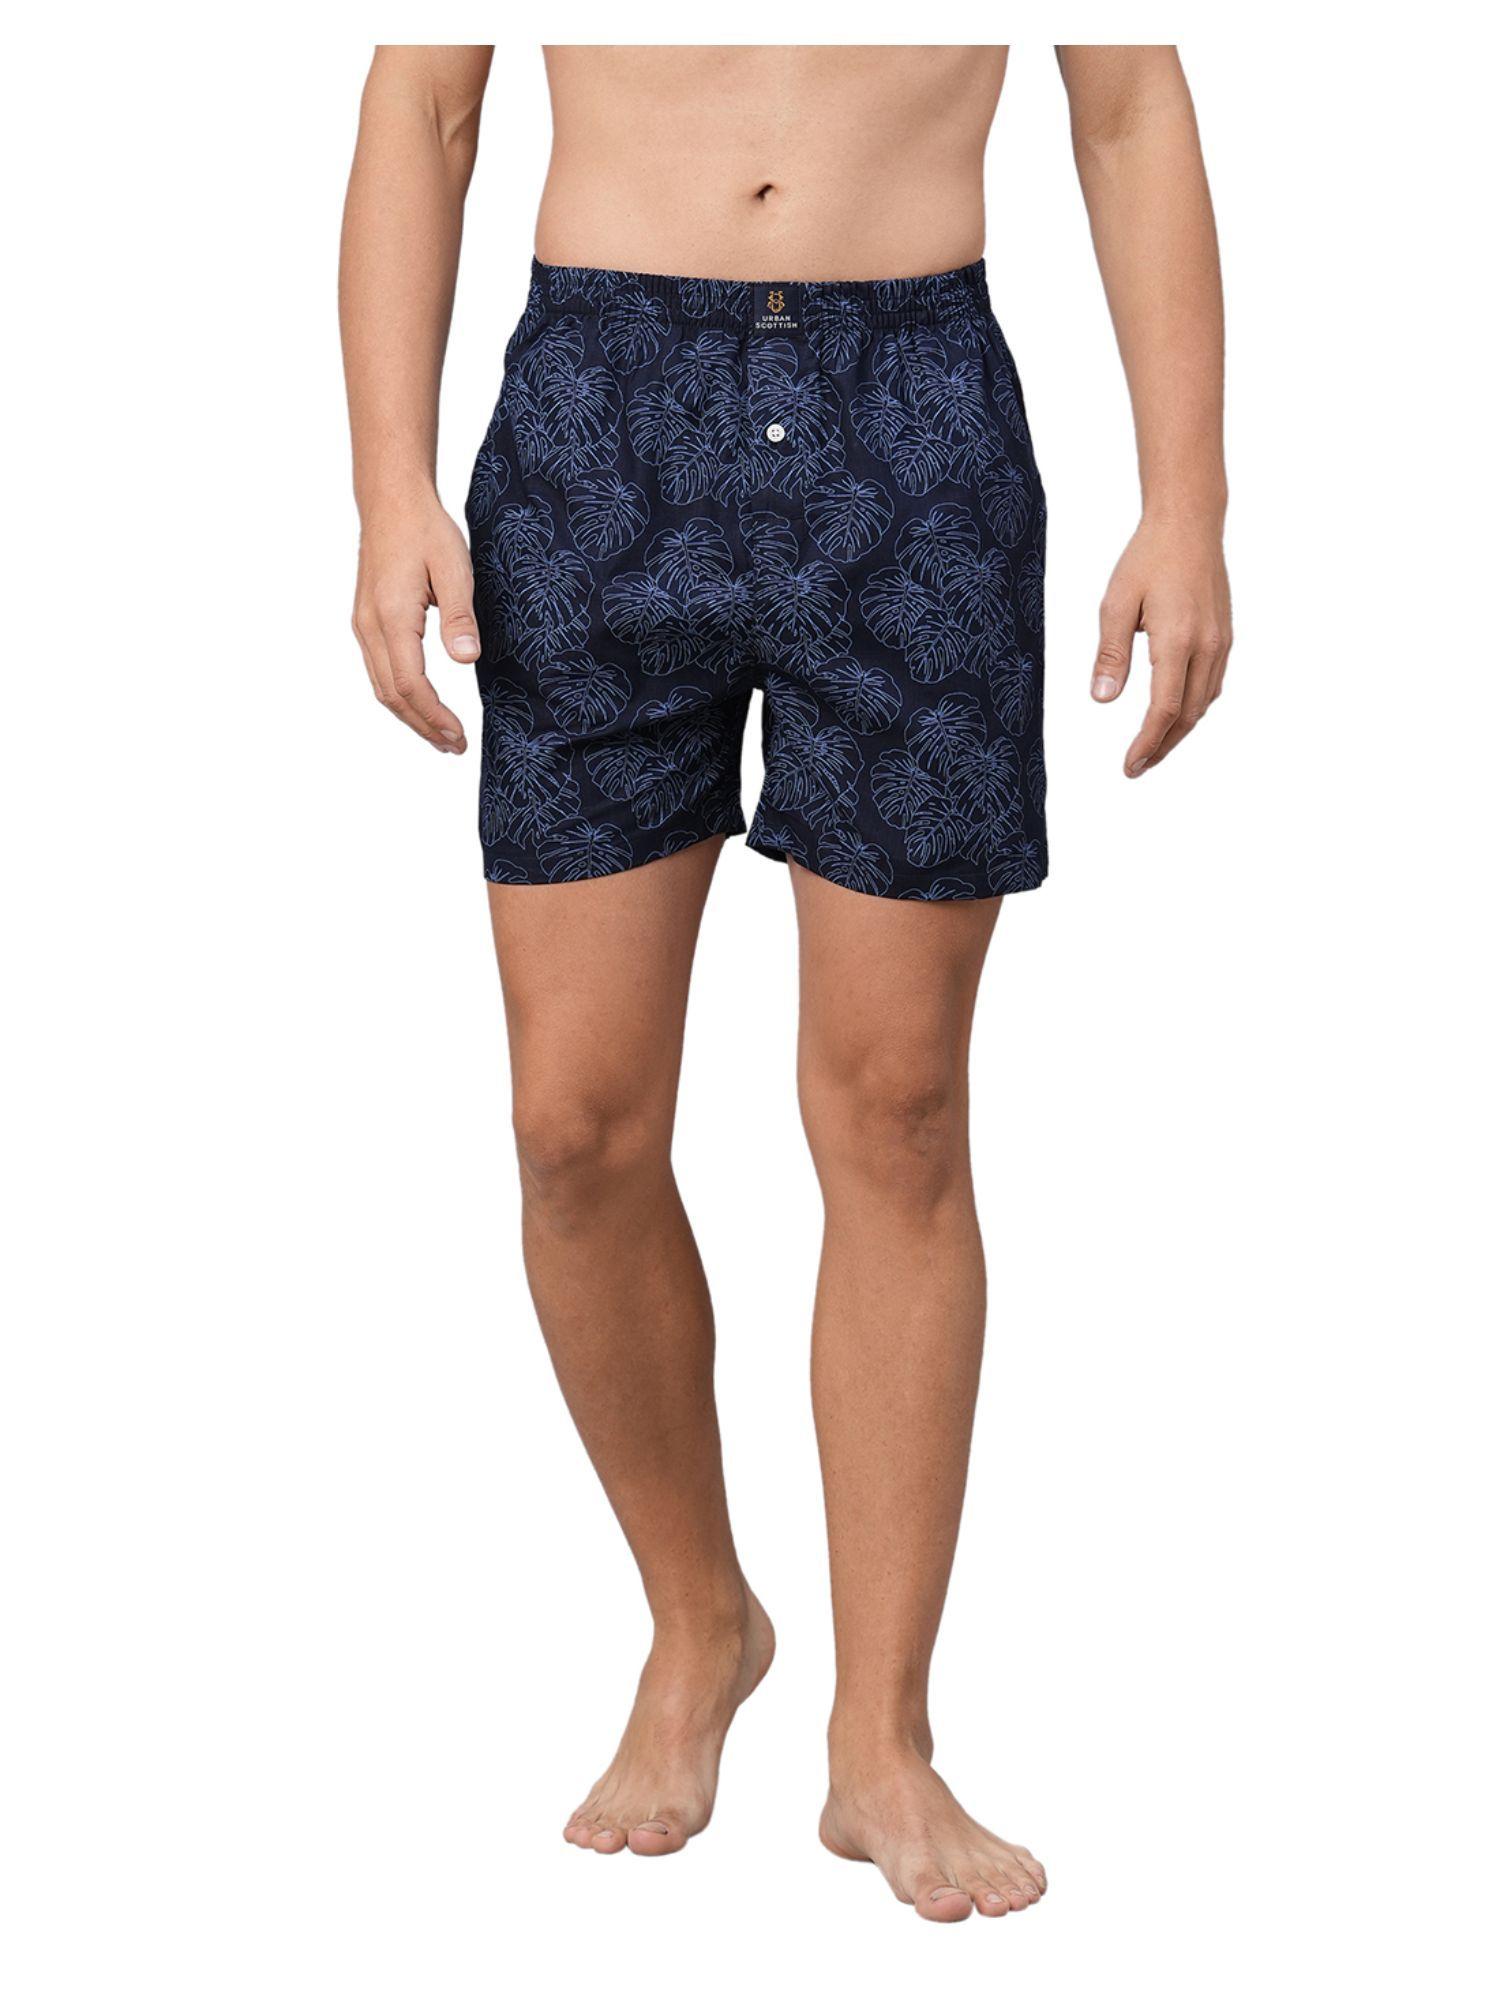 men-relaxed-navy-blue-printed-boxer-shorts